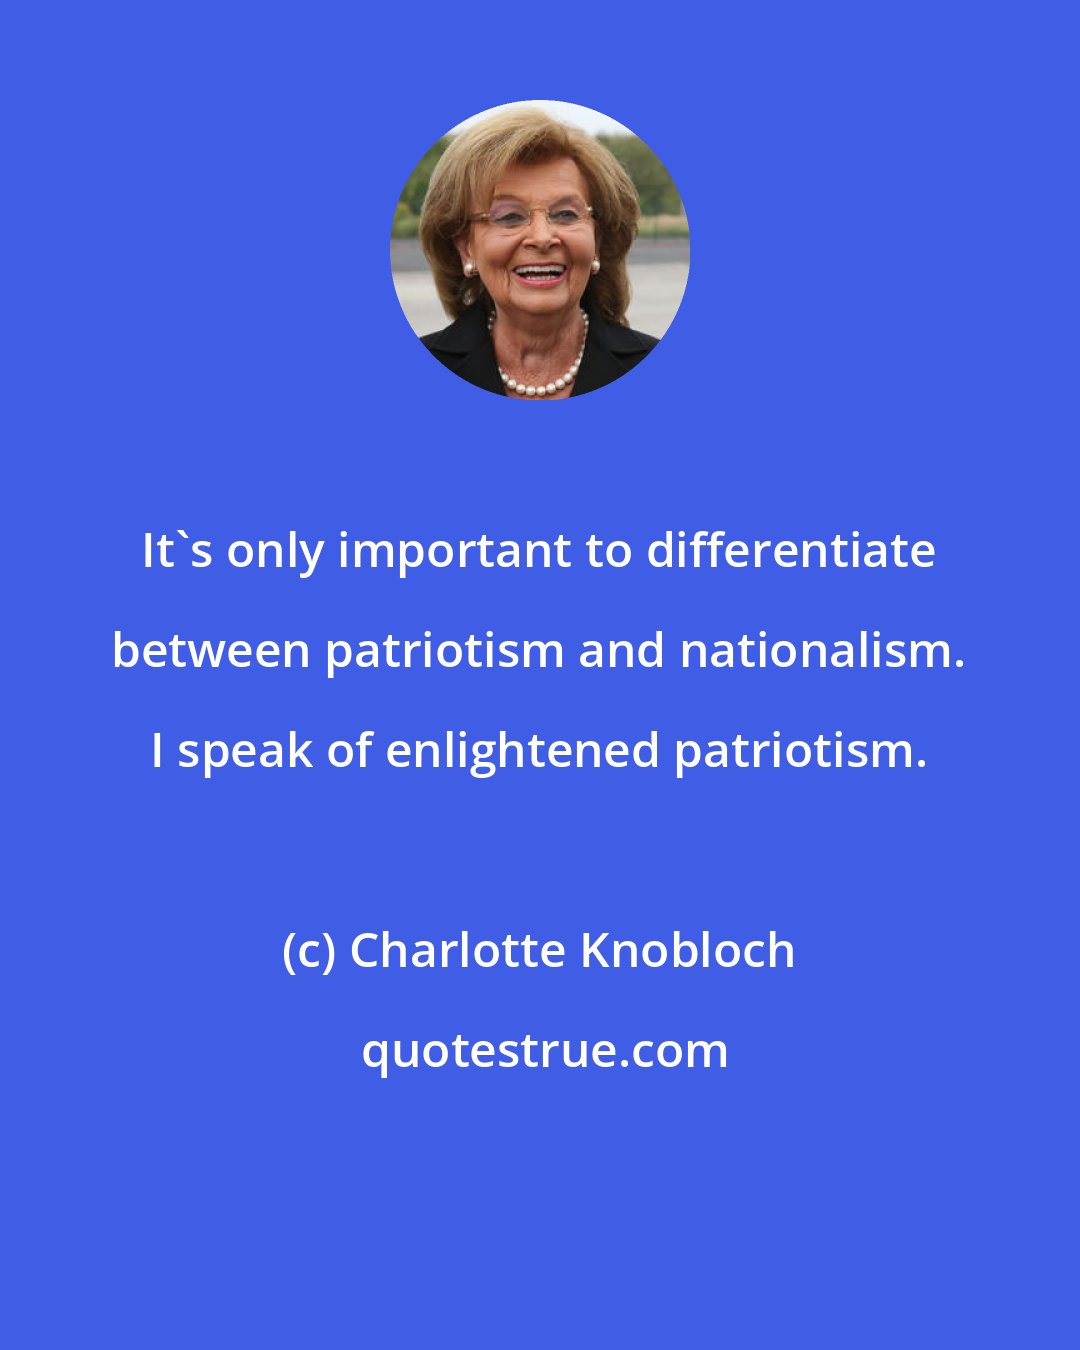 Charlotte Knobloch: It's only important to differentiate between patriotism and nationalism. I speak of enlightened patriotism.